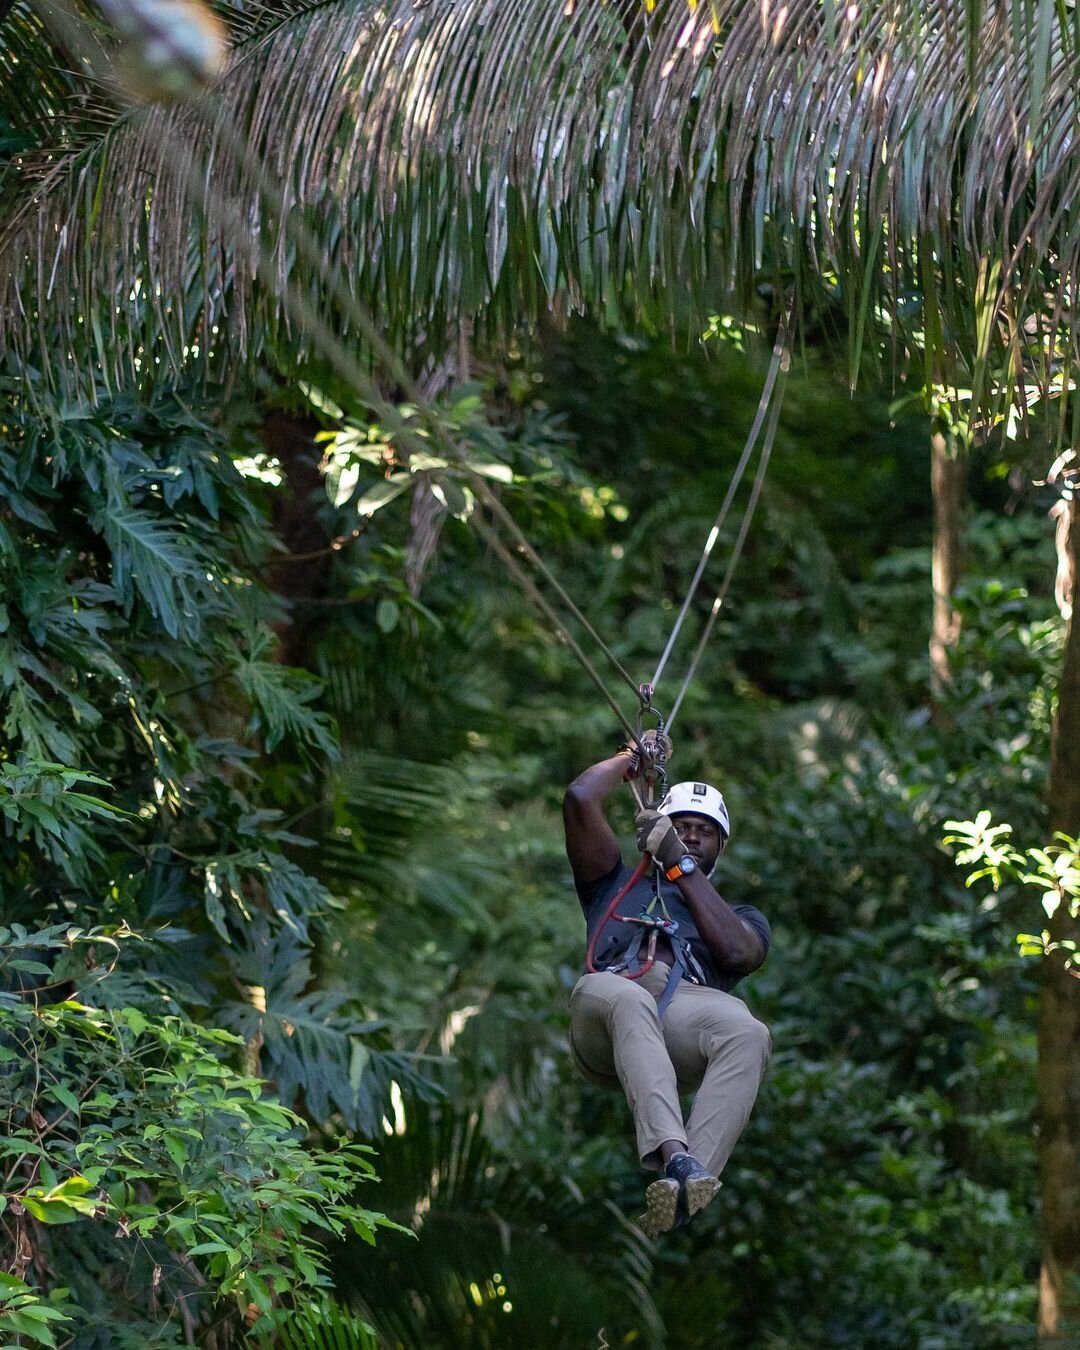 Zipline through the canopies at Bocawina Rainforest Resort and feel like a true jungle explorer! 🌳🌟 From breathtaking heights to exhilarating speeds, every moment is an adrenaline rush! 😎
Bring the entire family for a fun jungle adventure! 🏃🏃&zw